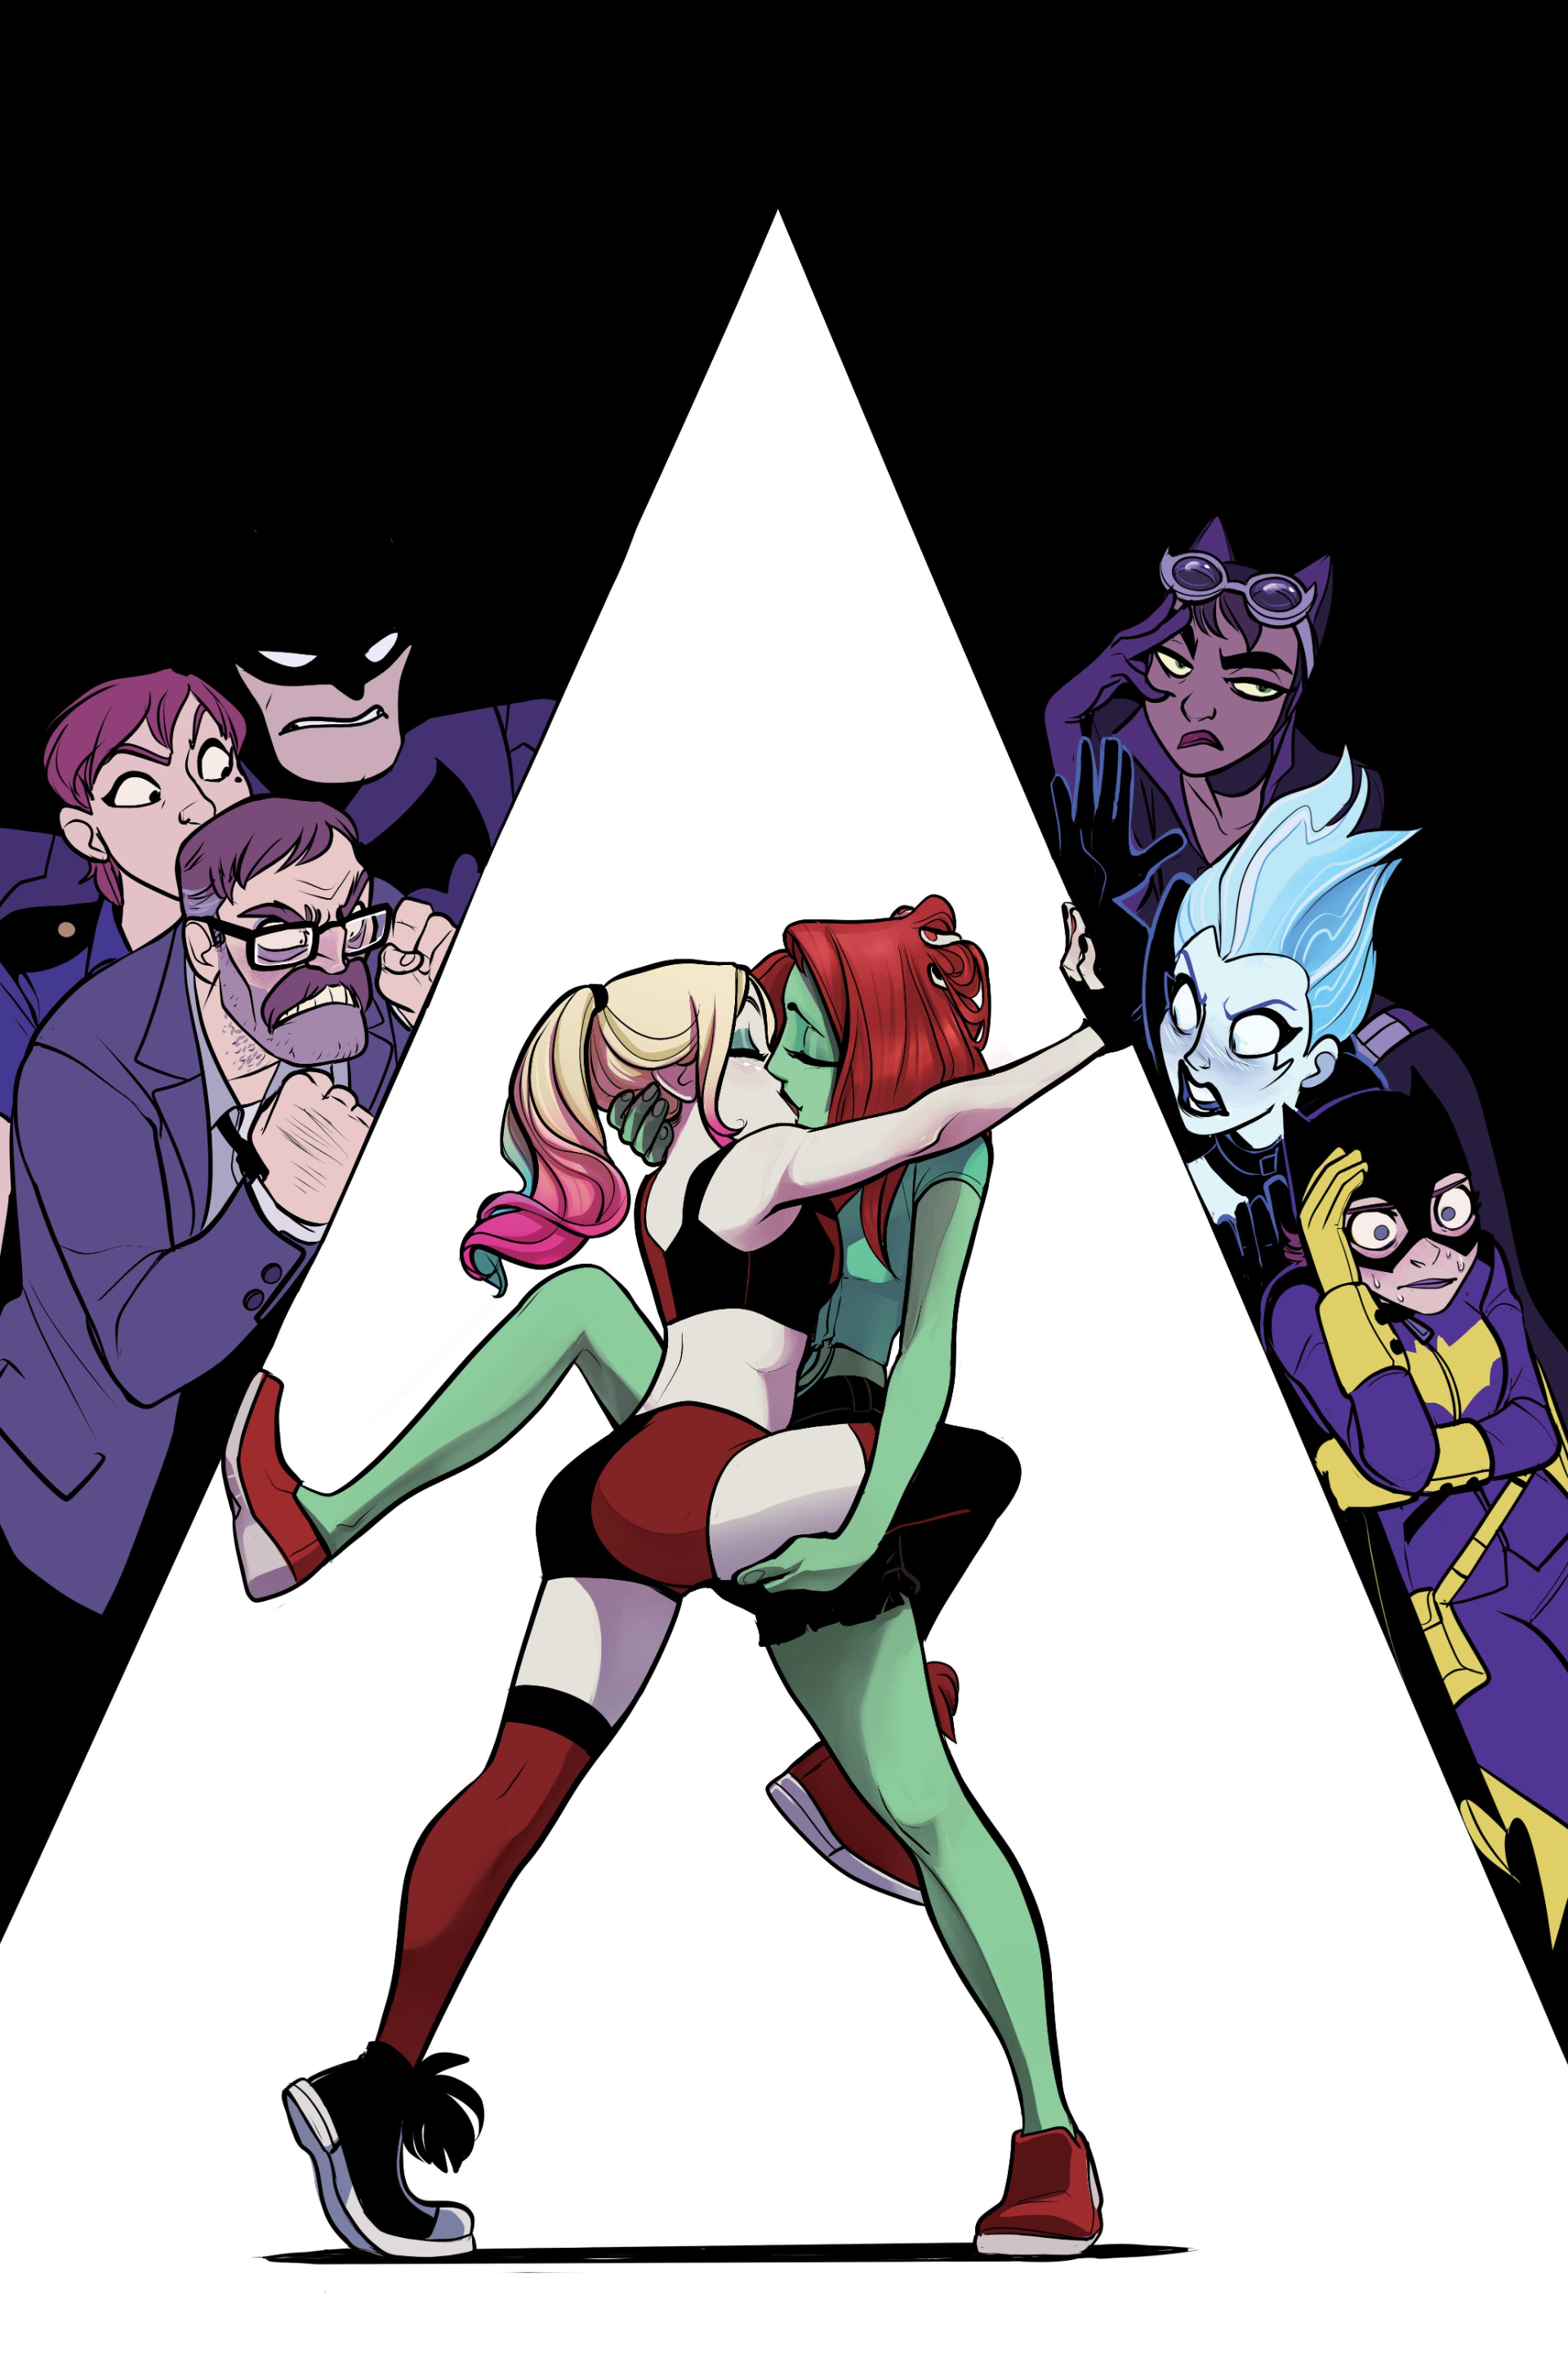 Harley Quinn and Her Team of Super Villains - YouTube